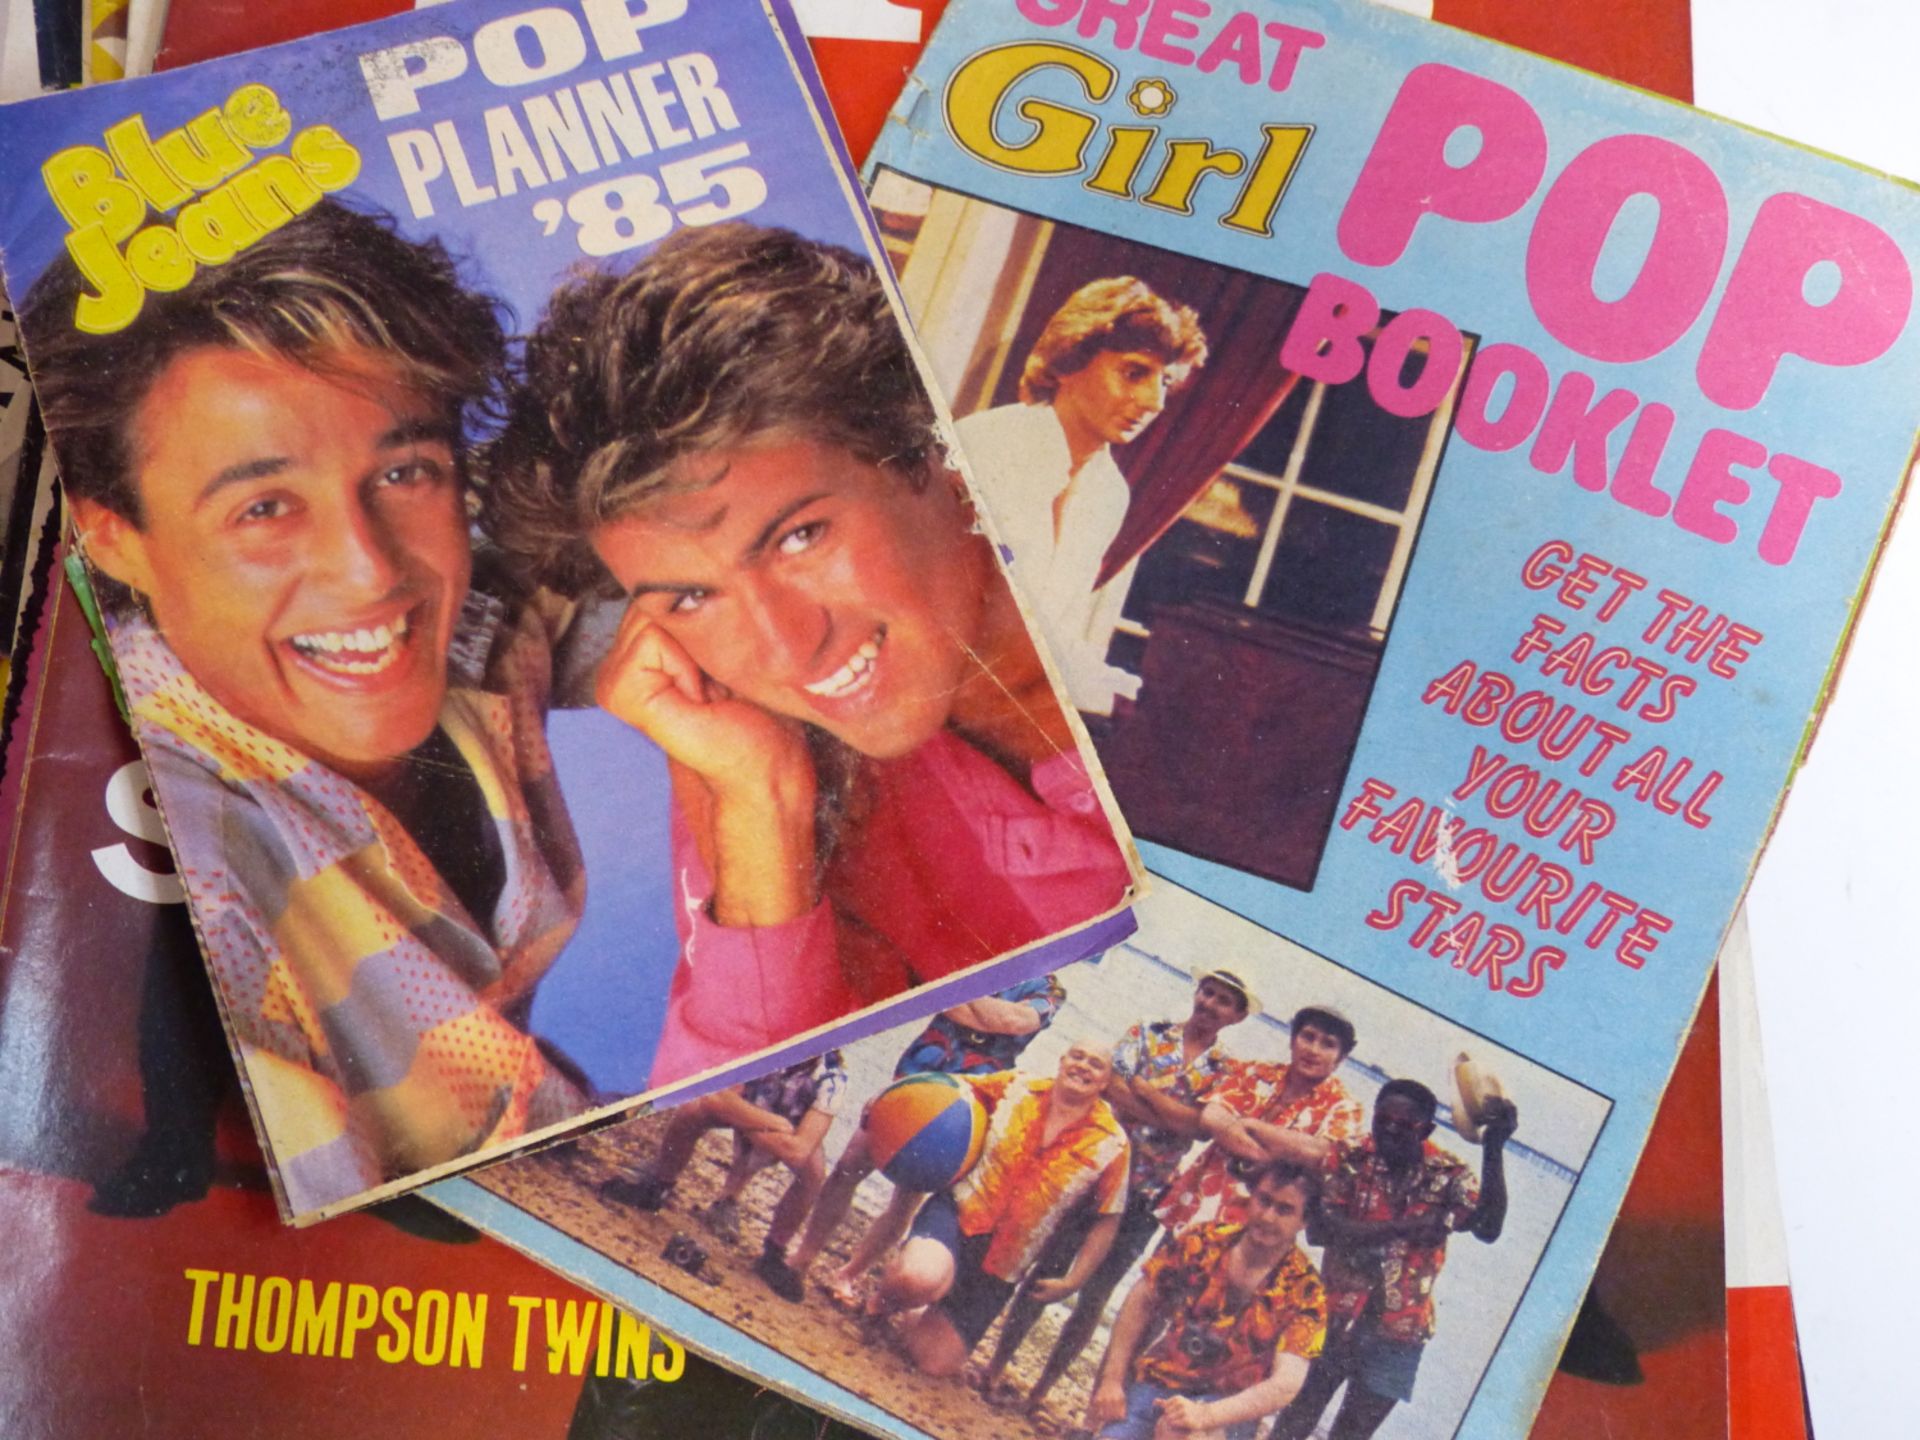 A COLLECTION OF VINTAGE 1980'S SMASH HITS MAGAZINES. - Image 4 of 4